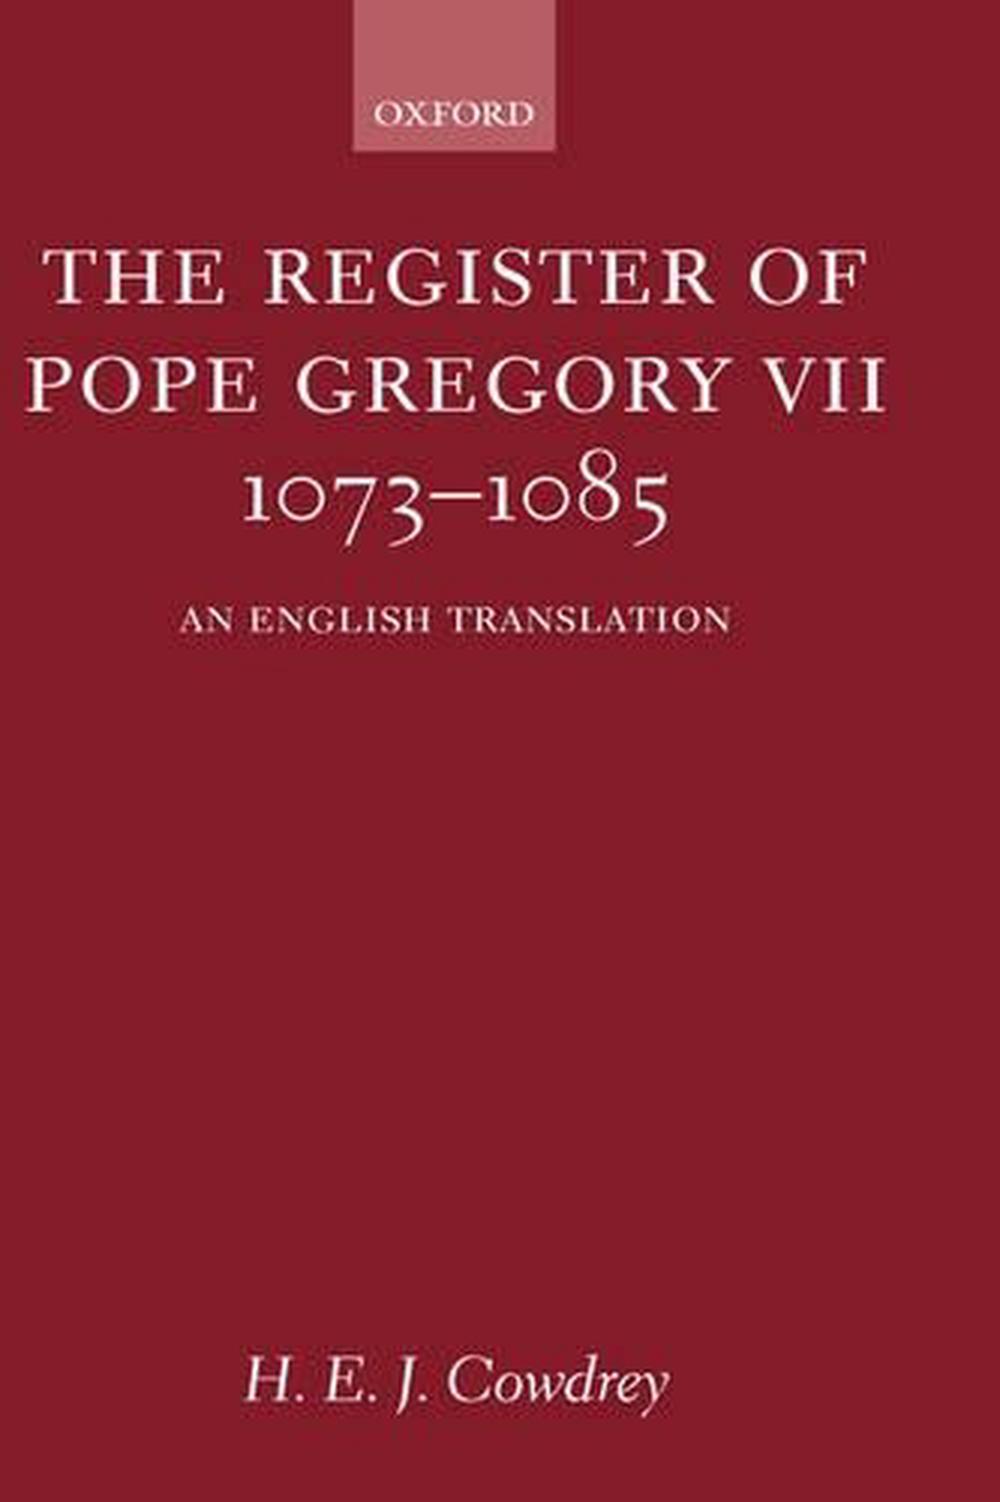 The Register of Pope Gregory VII 10731085 An English Translation by H